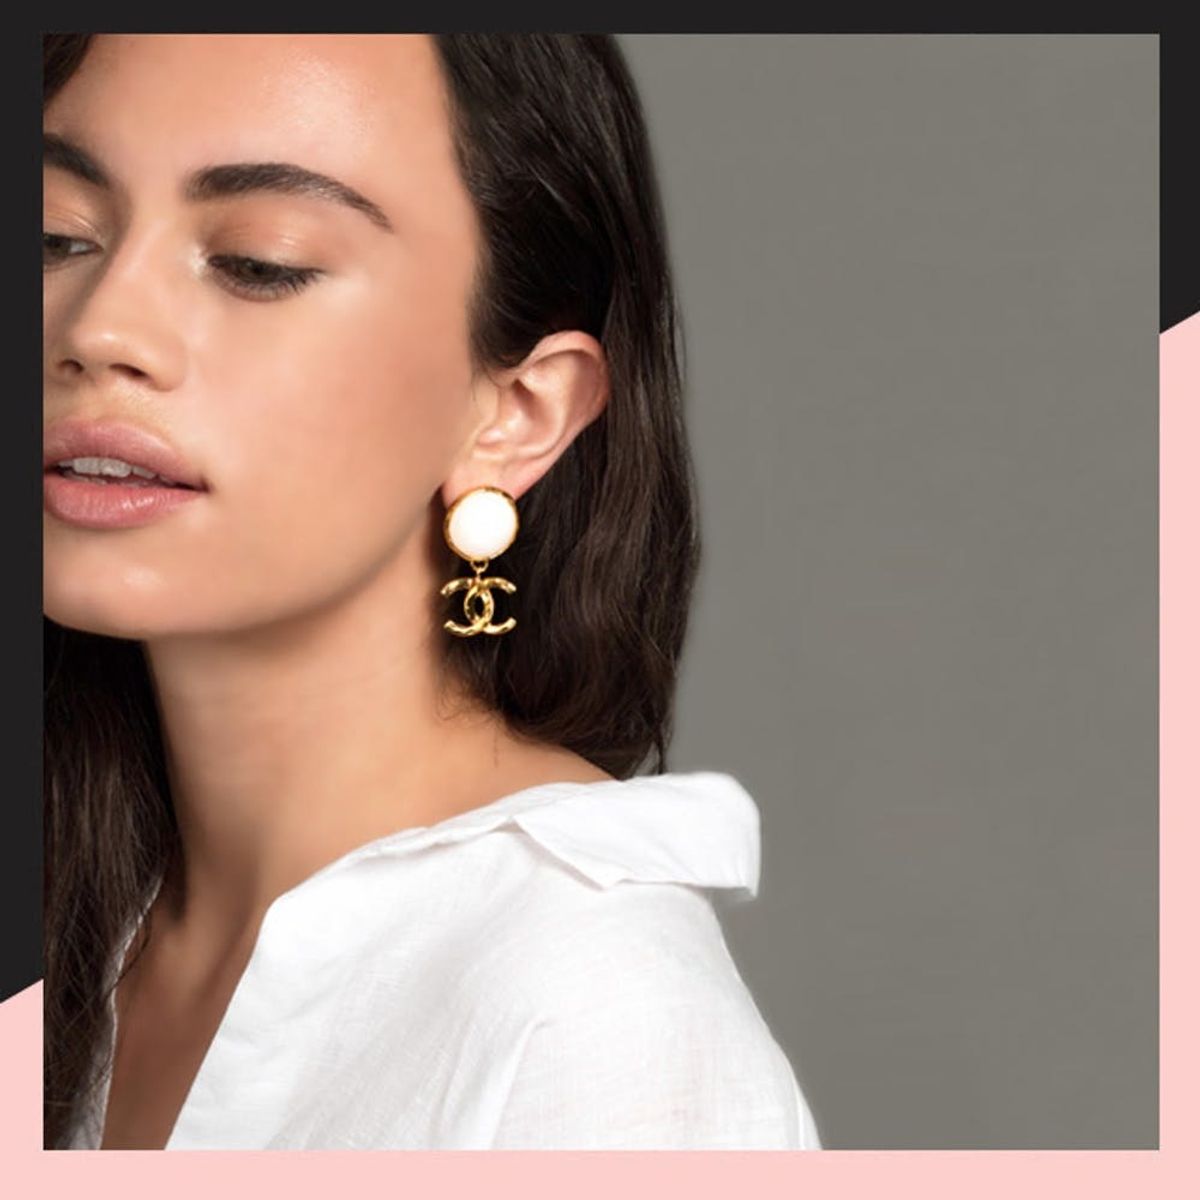 This New Jewelry Service Is Like Rent the Runway for High-End Baubles